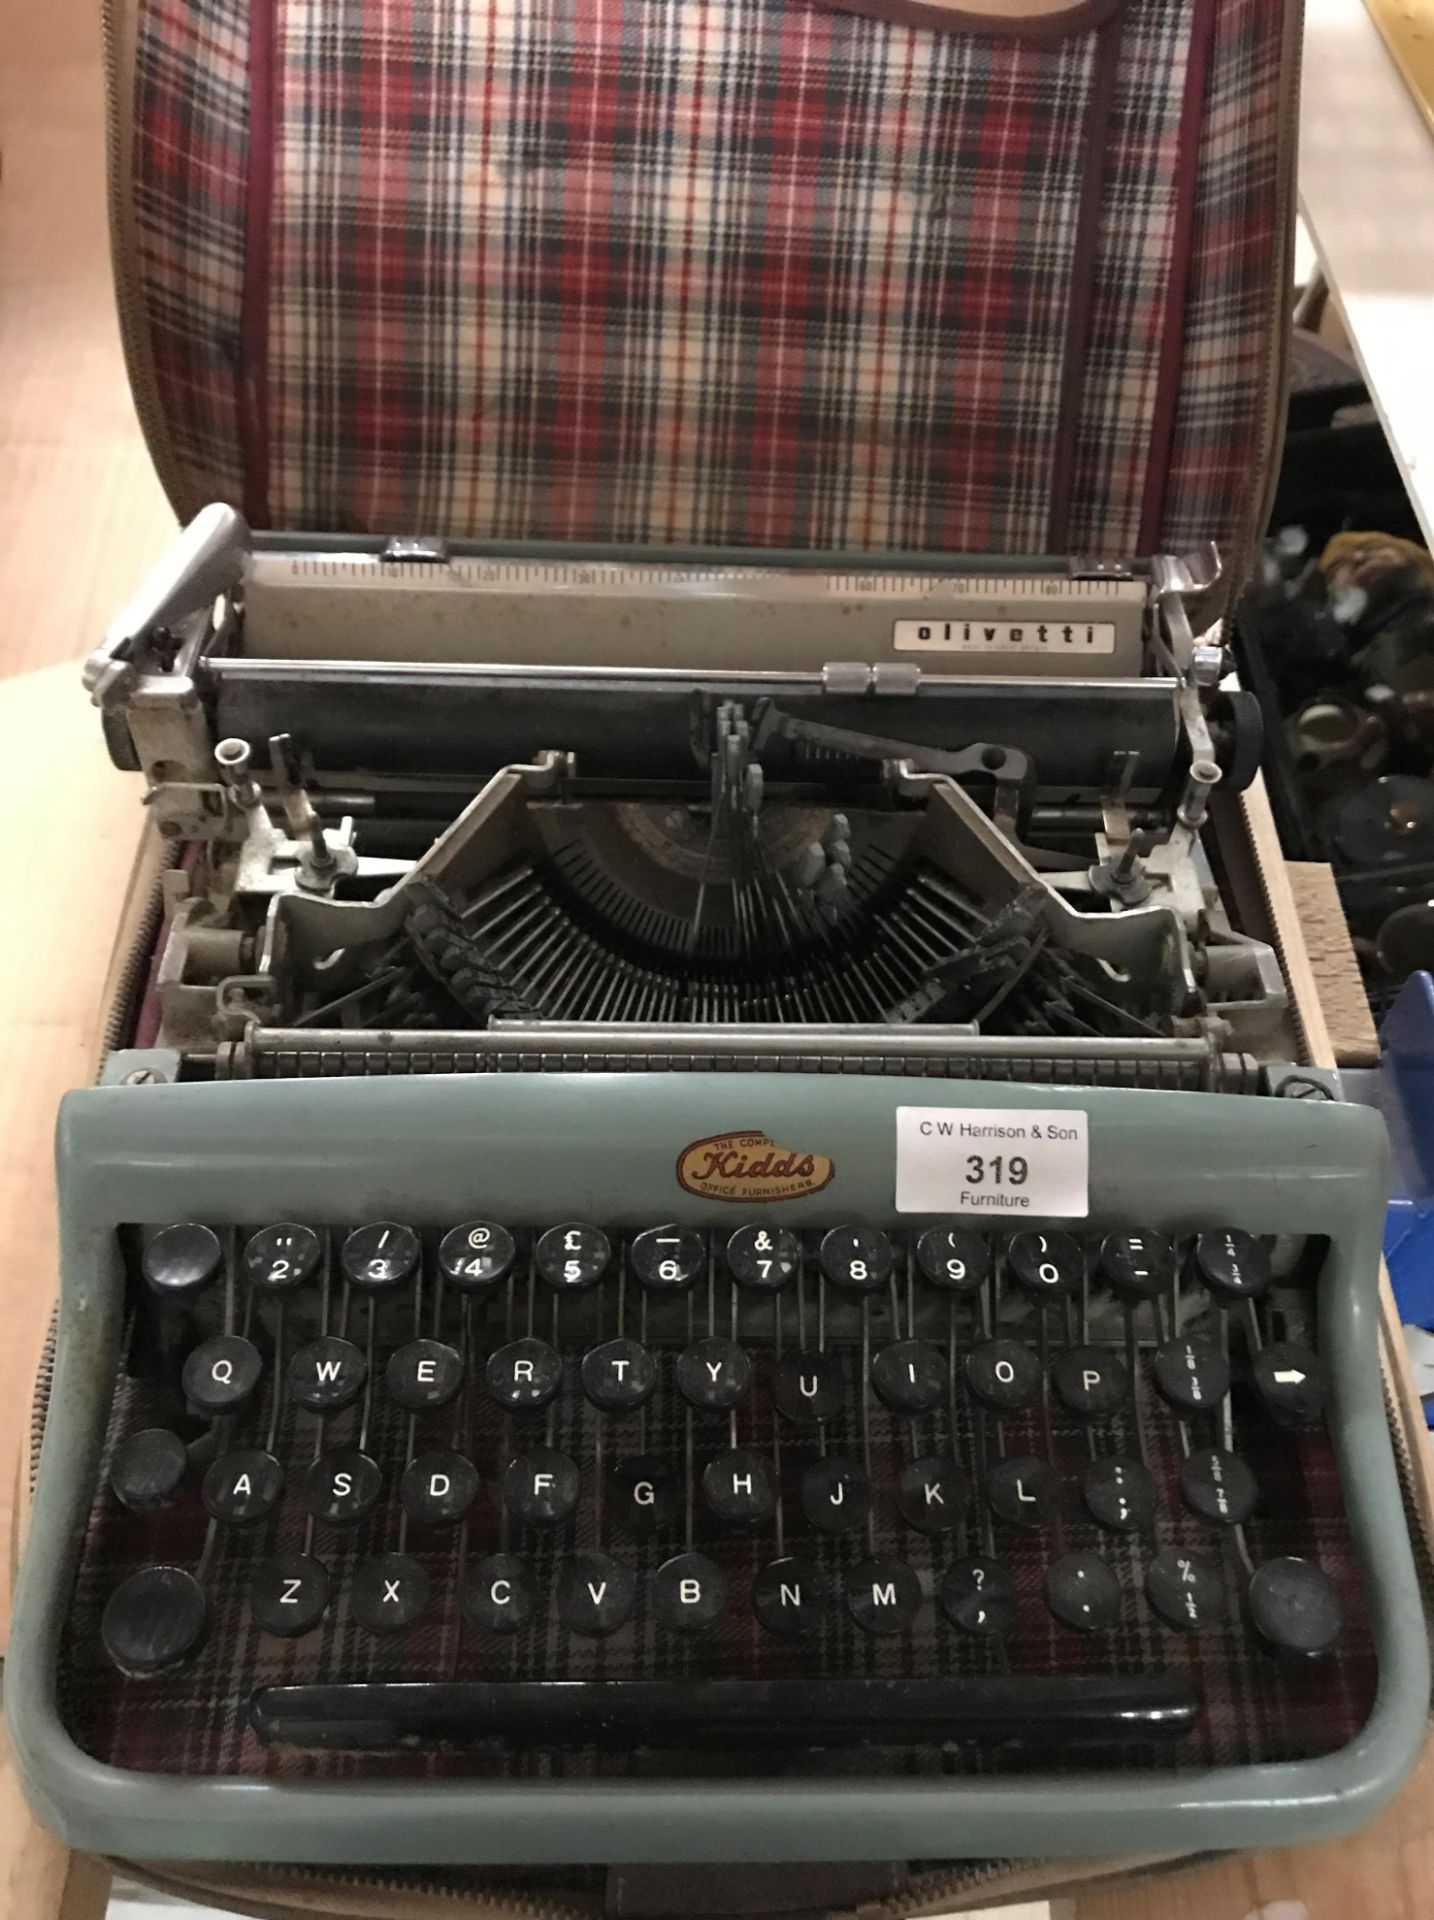 An Olivetti manual typewriter in carrying case